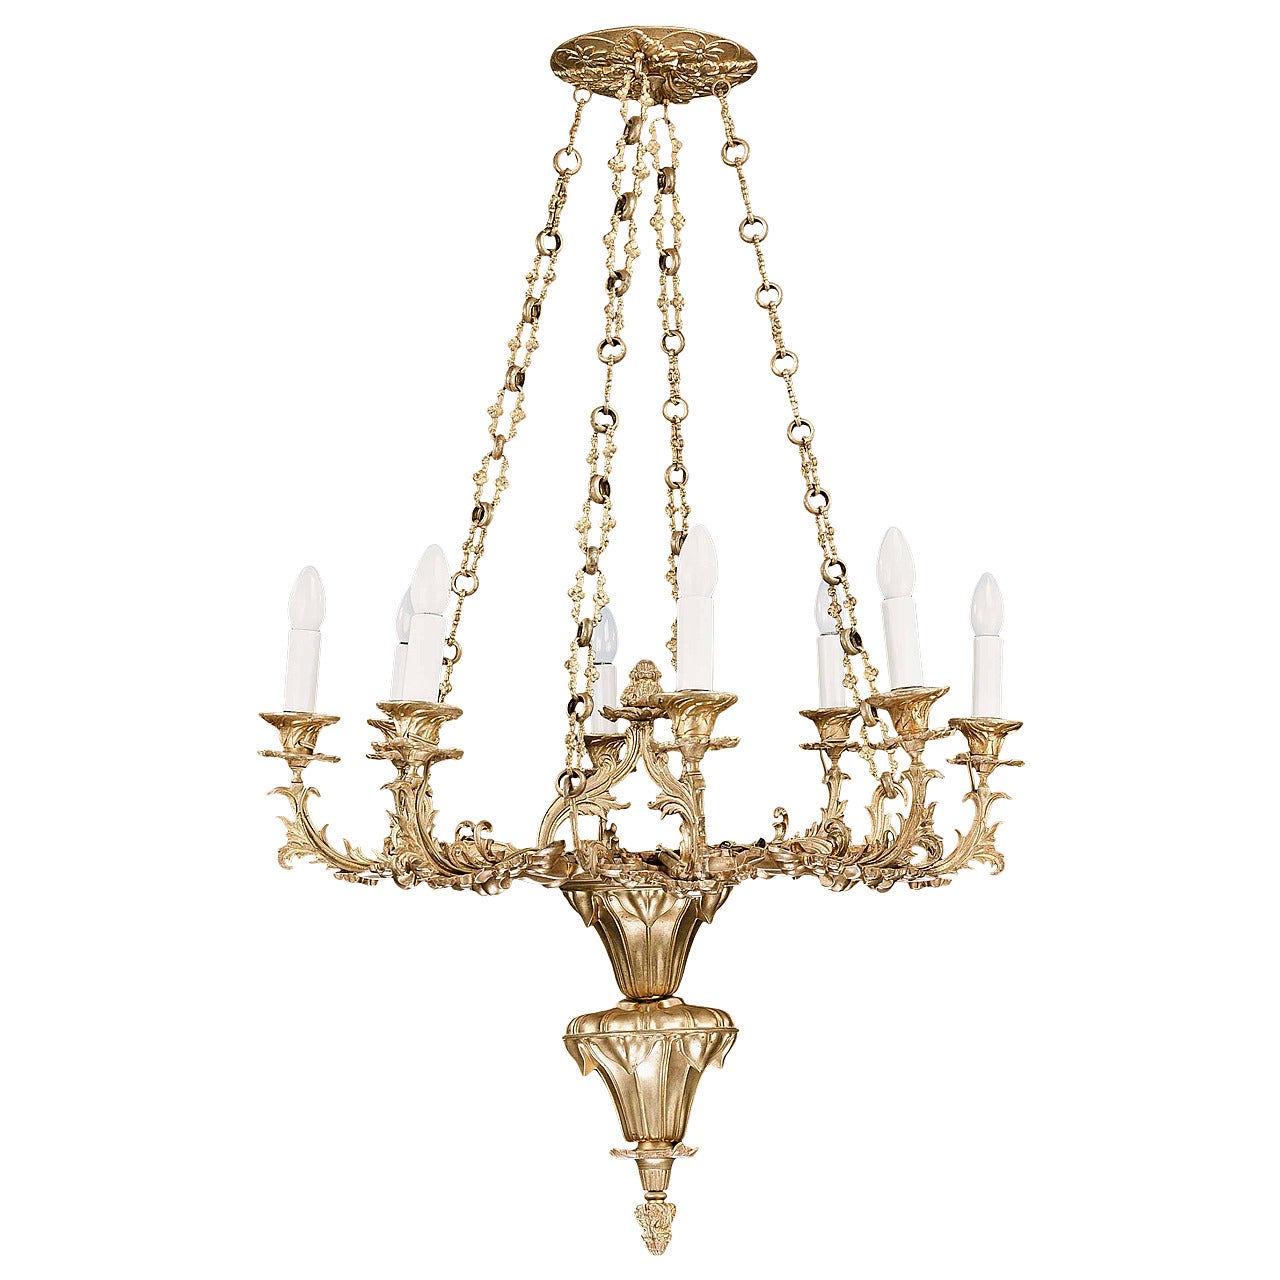 Late 19th Century Eight-Arm Chandelier